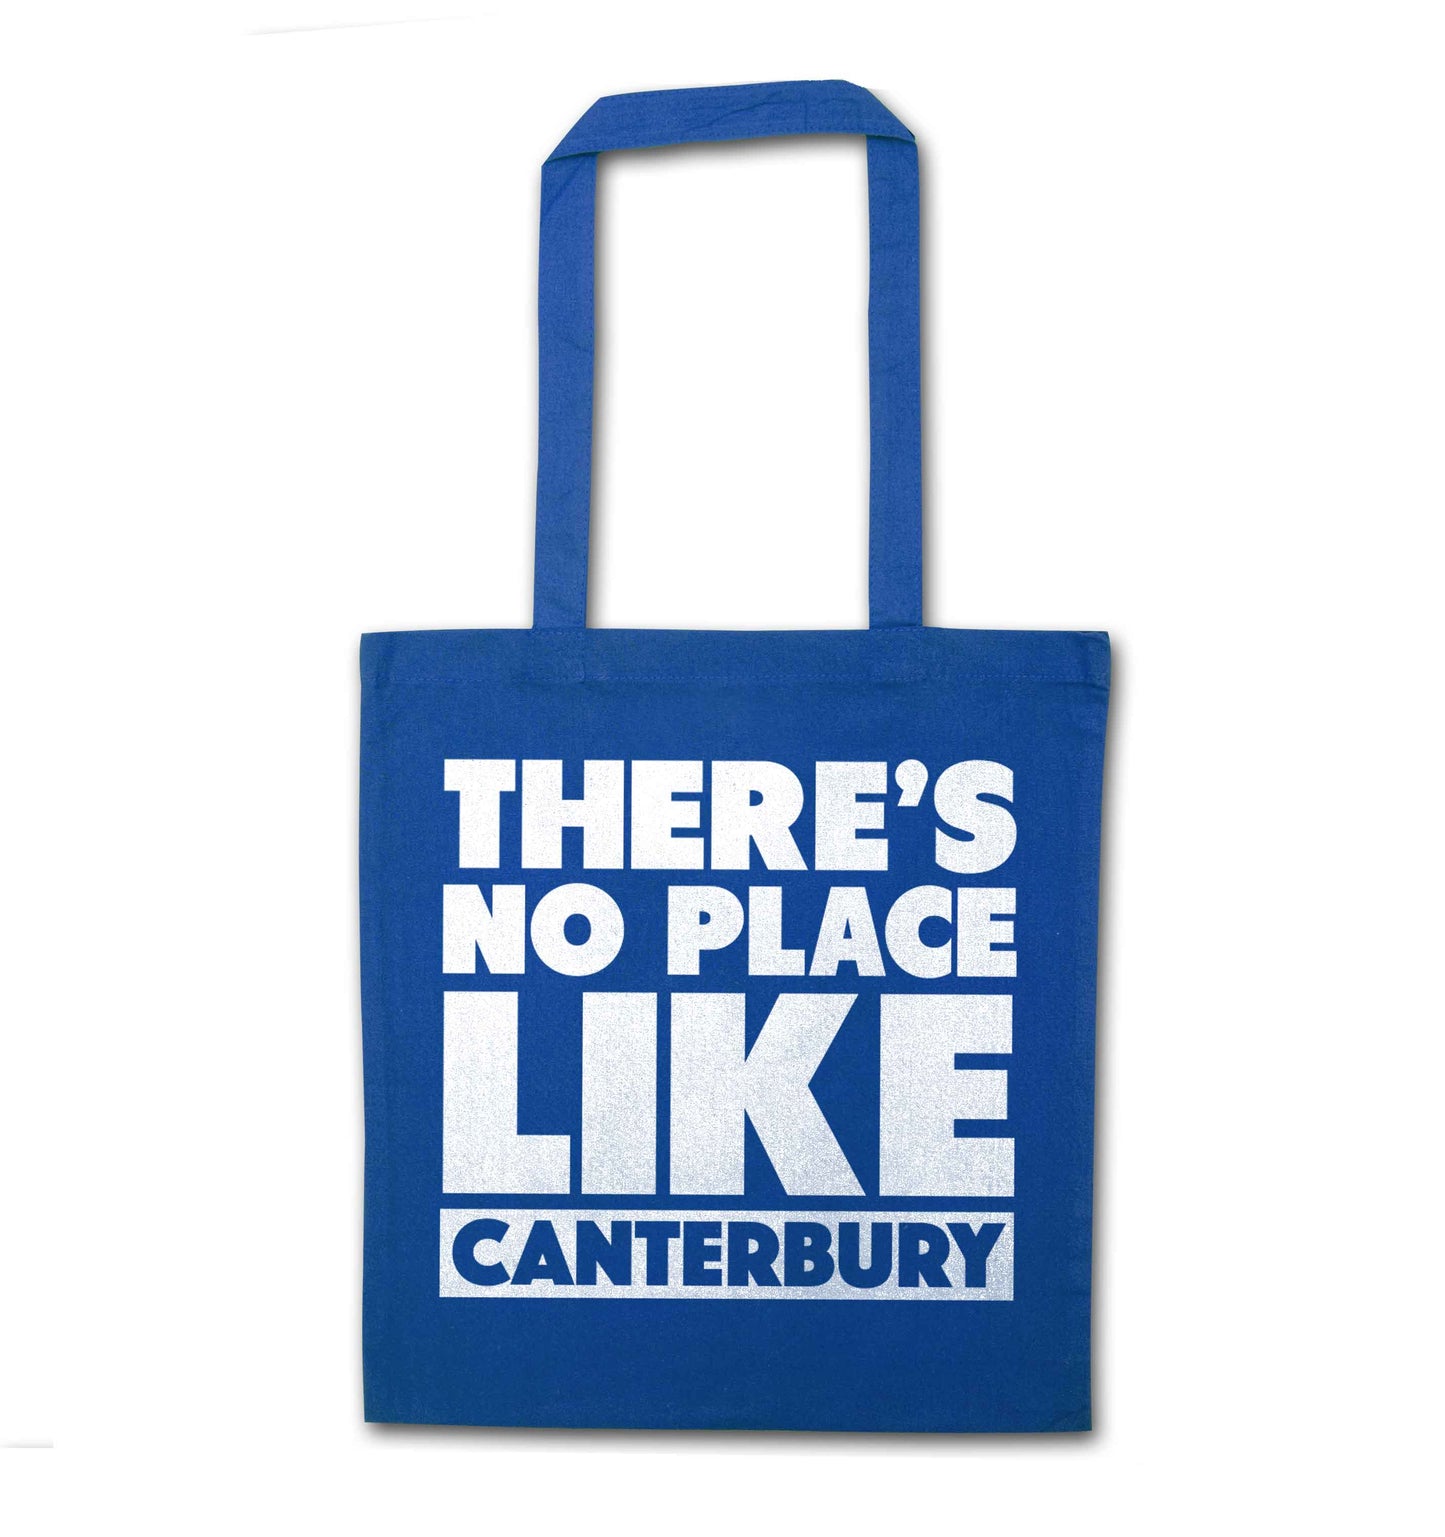 There's no place like Canterbury blue tote bag